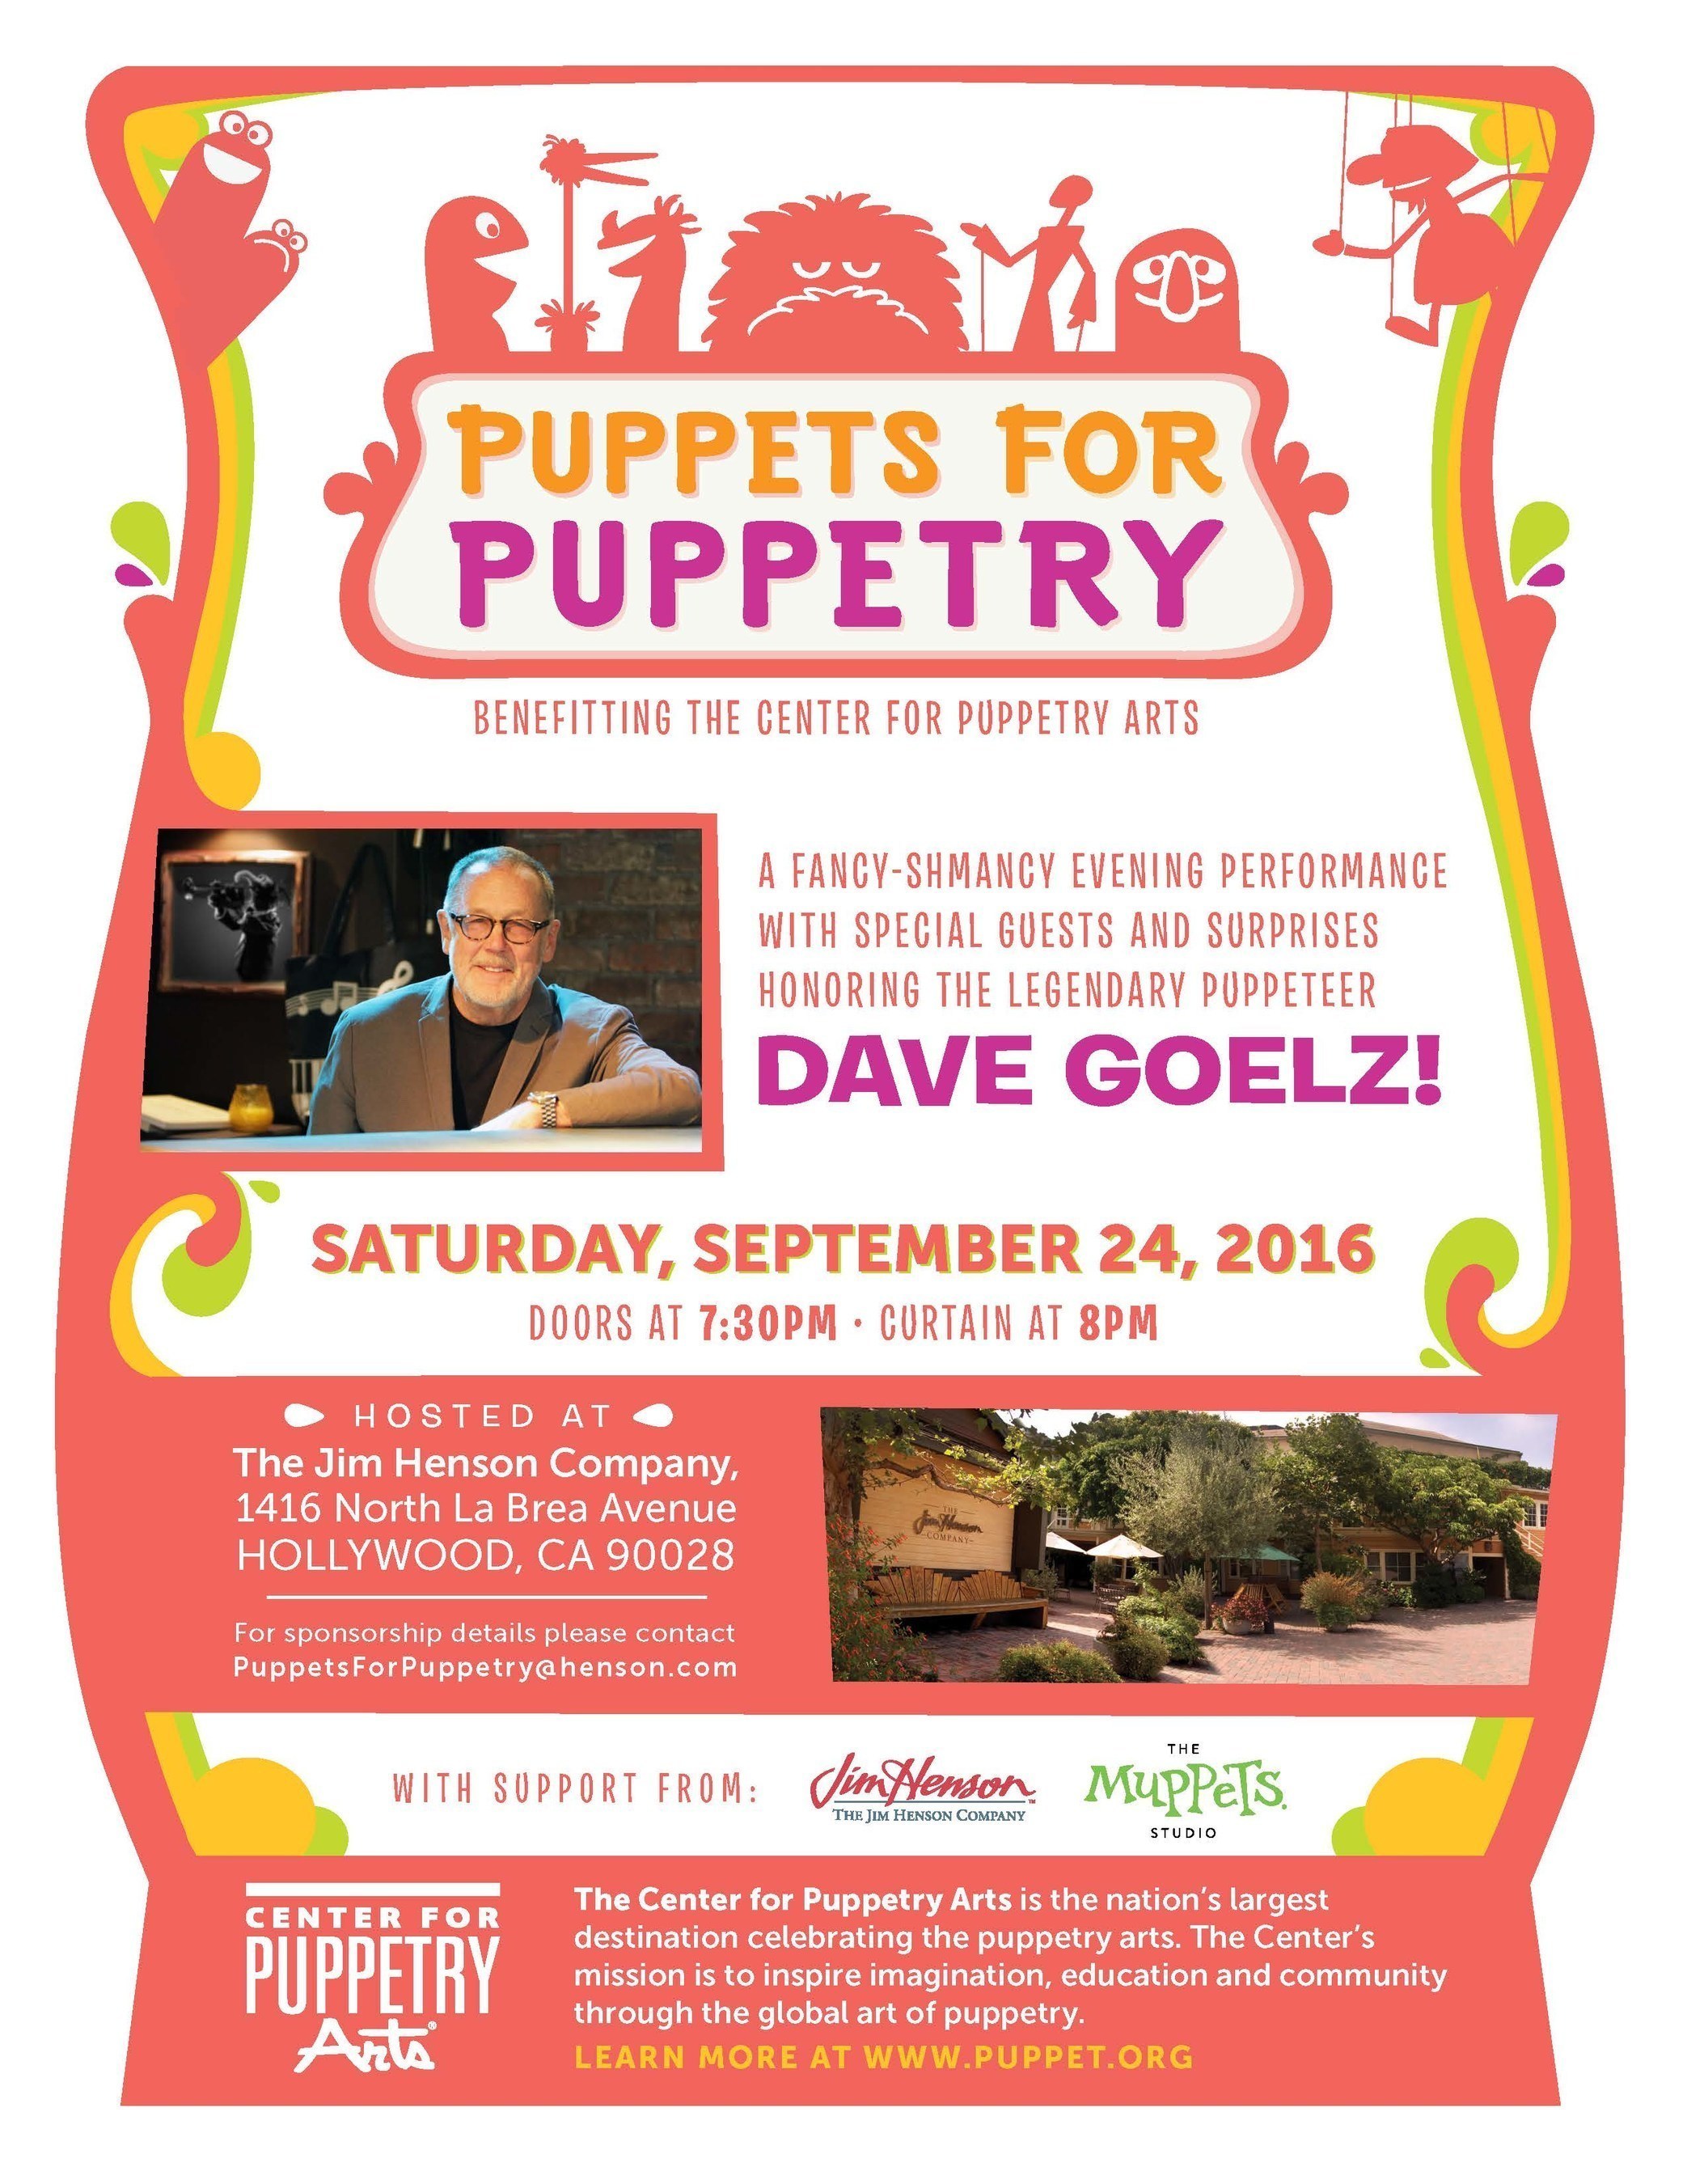 THE JIM HENSON COMPANY HOSTS, "PUPPETS FOR PUPPETRY" FUNDRAISER TO HONOR THE ESTEEMED PUPPETEER DAVE GOELZ ON SEPTEMBER 24, 2016